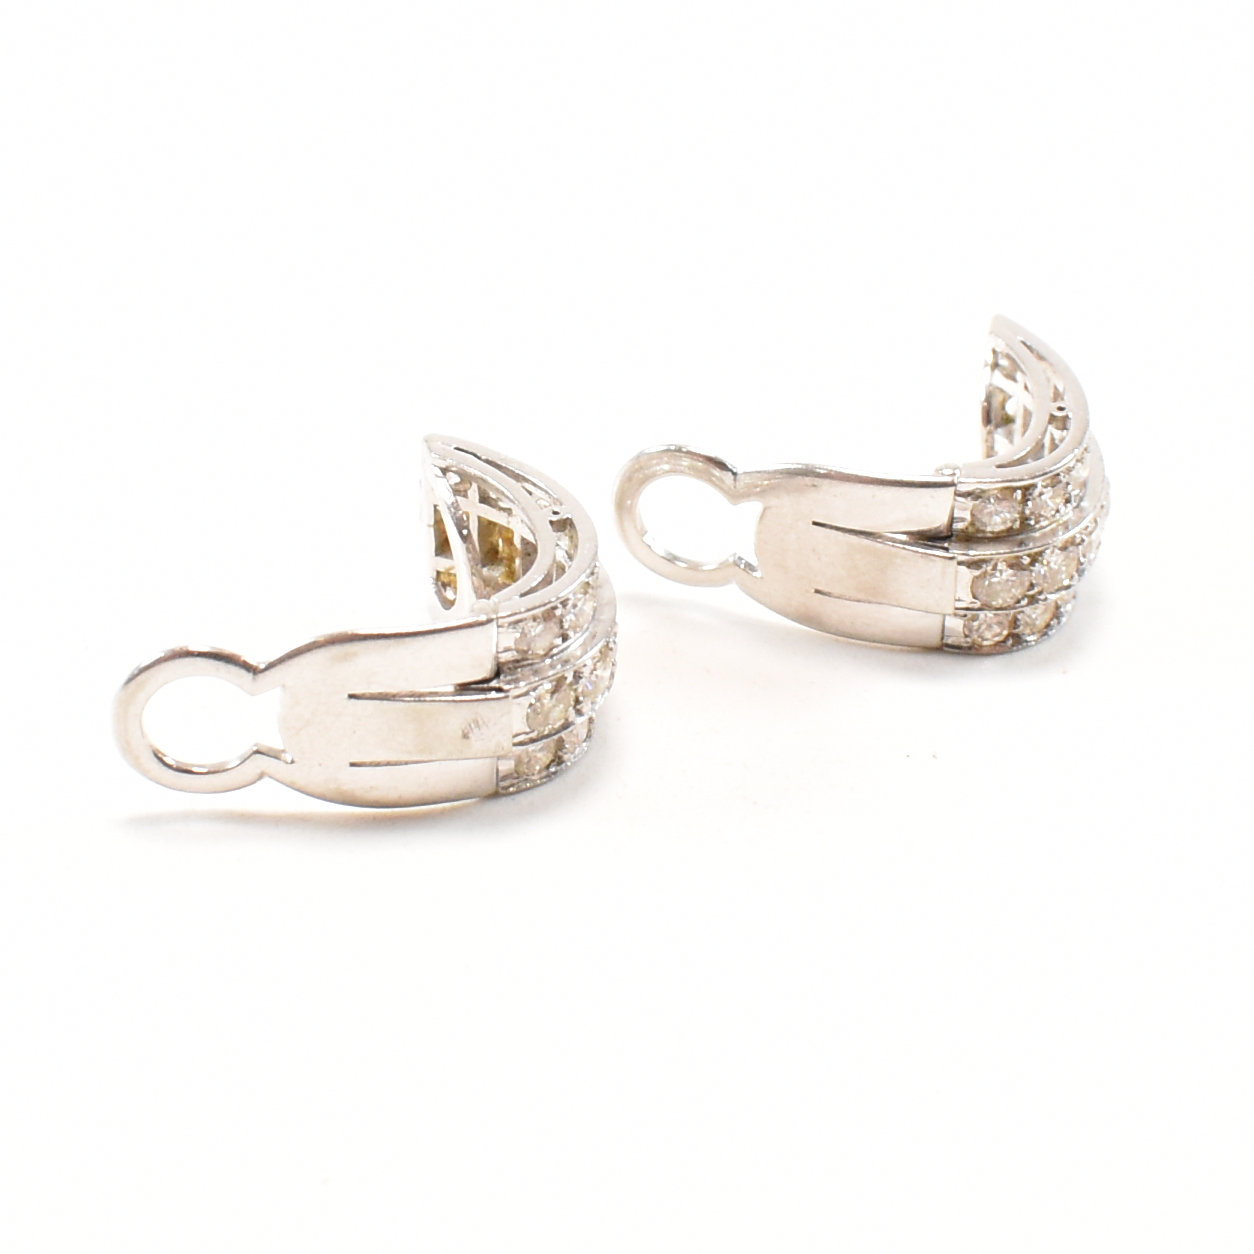 PAIR OF ART DECO 18CT WHITE GOLD & DIAMONDS EAR CLIPS - Image 8 of 8